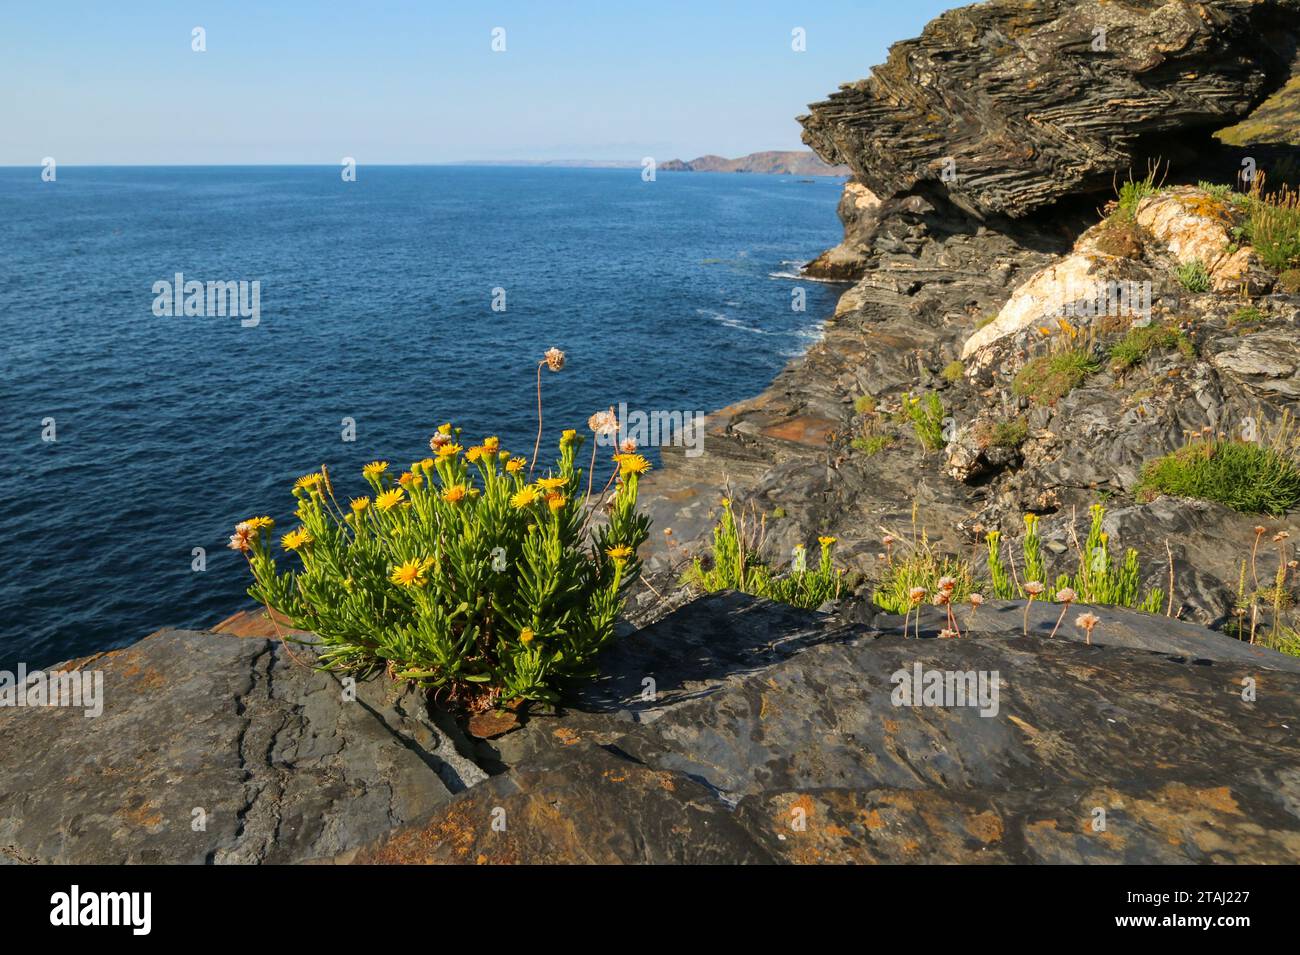 Wild flowers growing on the rocks above the sea near Boscastle, Cornwall, England Stock Photo